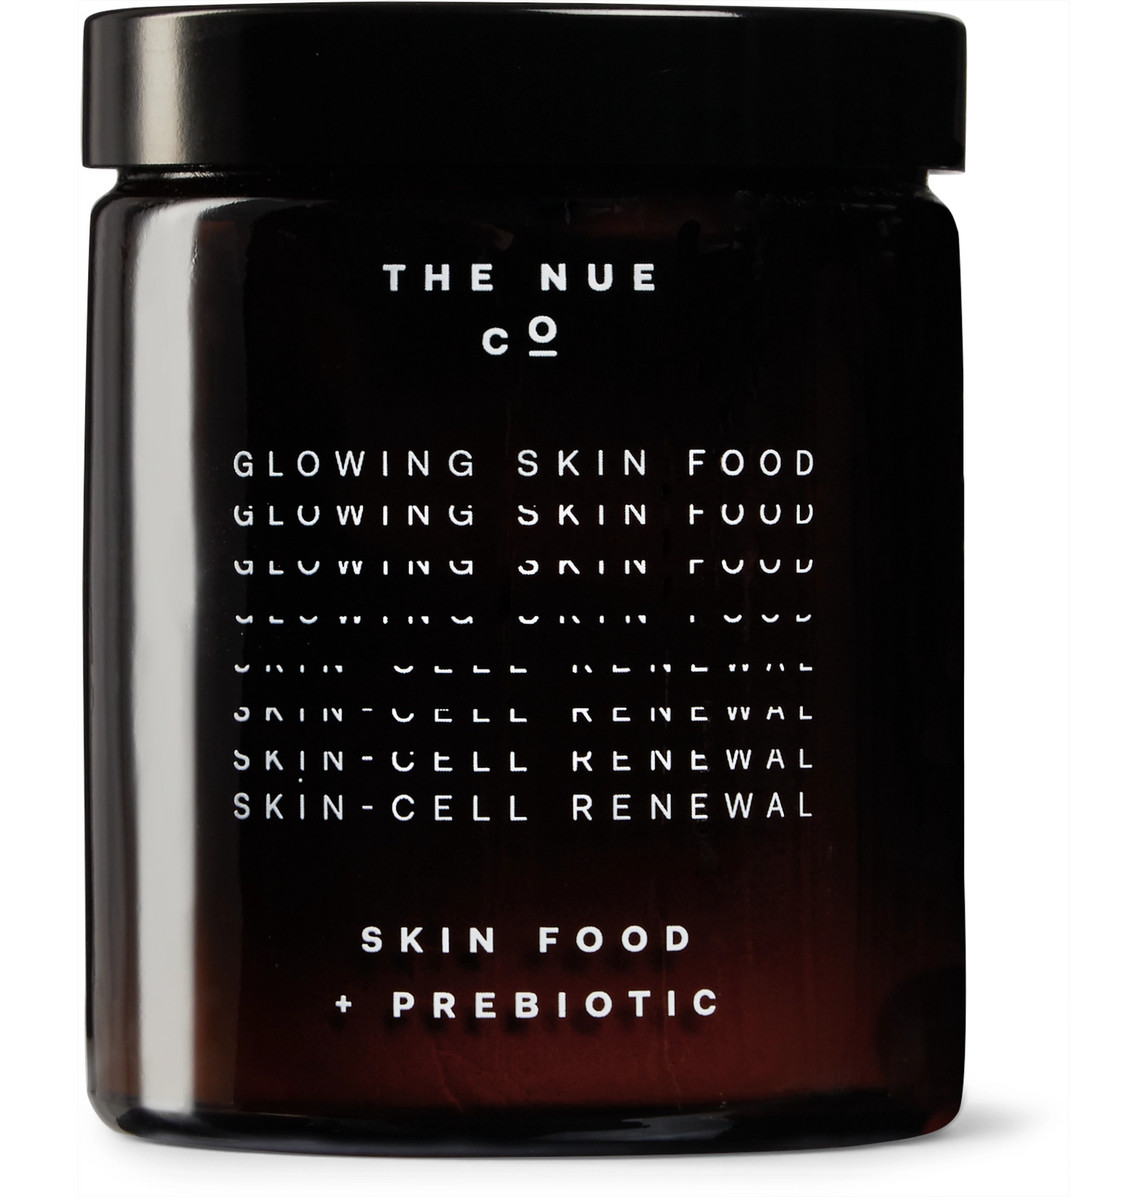 The Nue Co Skin Food Prebiotic, 100g In Colourless